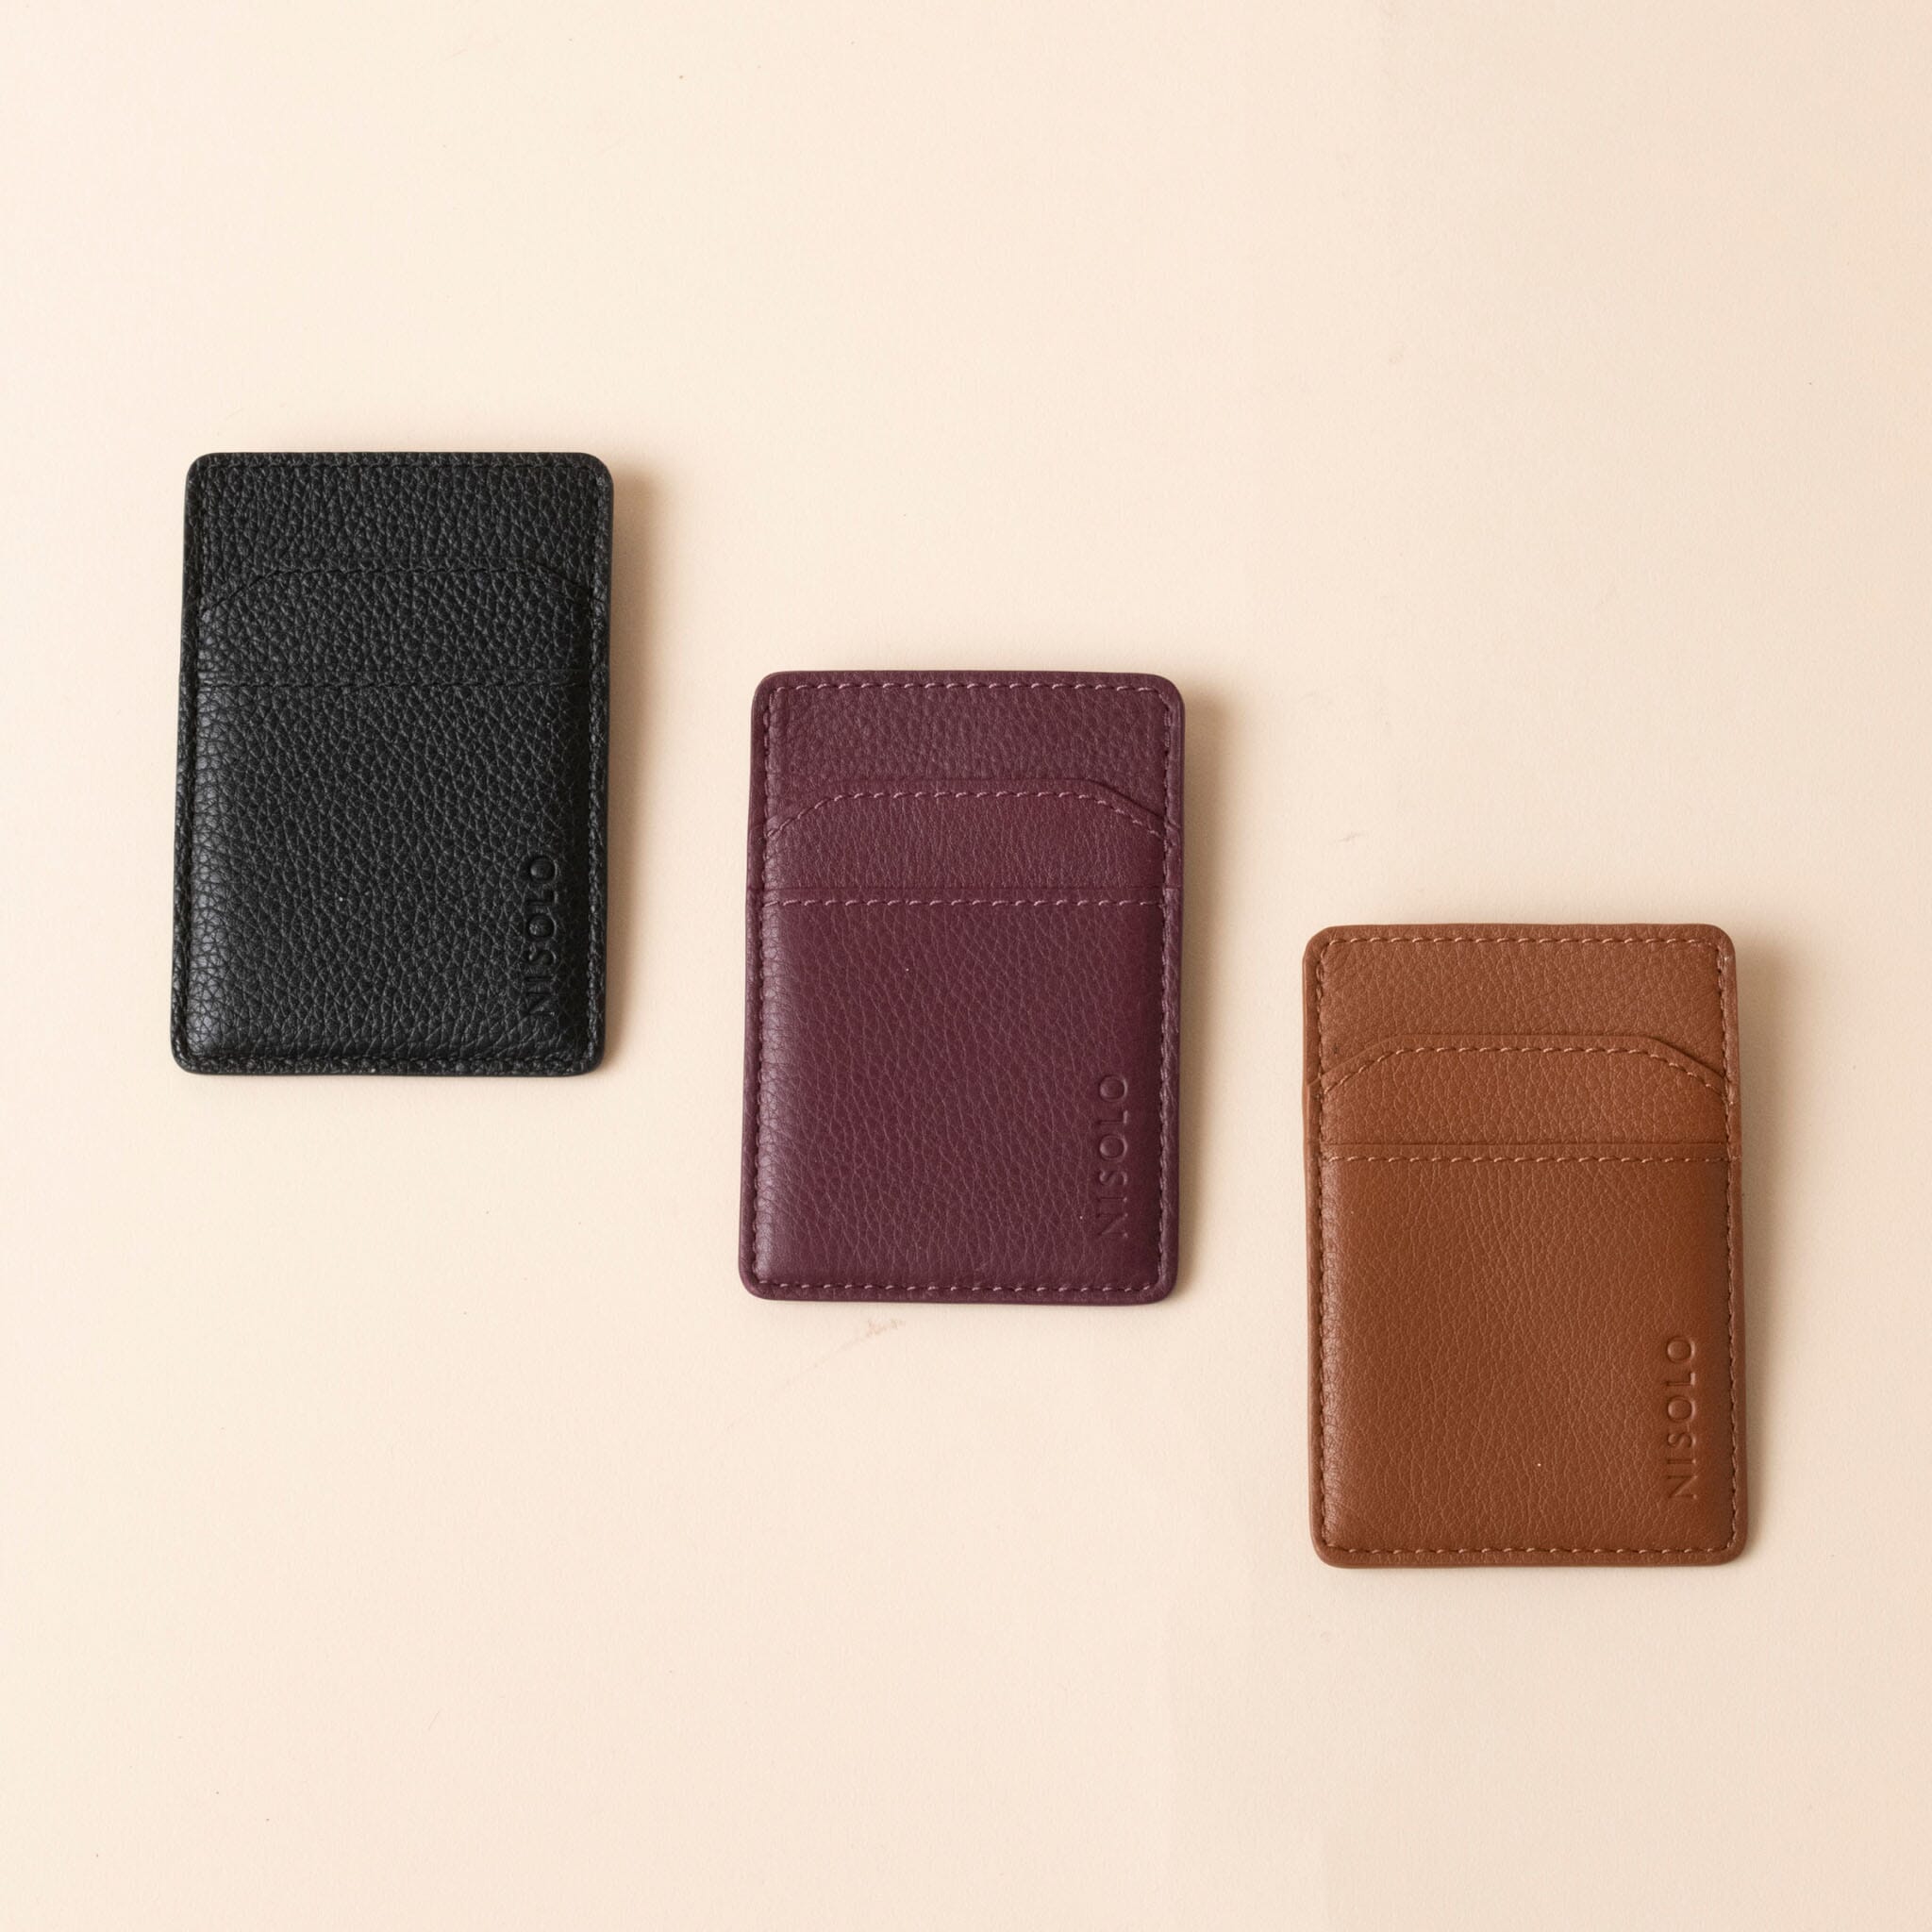 Nico Card Case Wallet Plum Leather Card Case Nisolo 